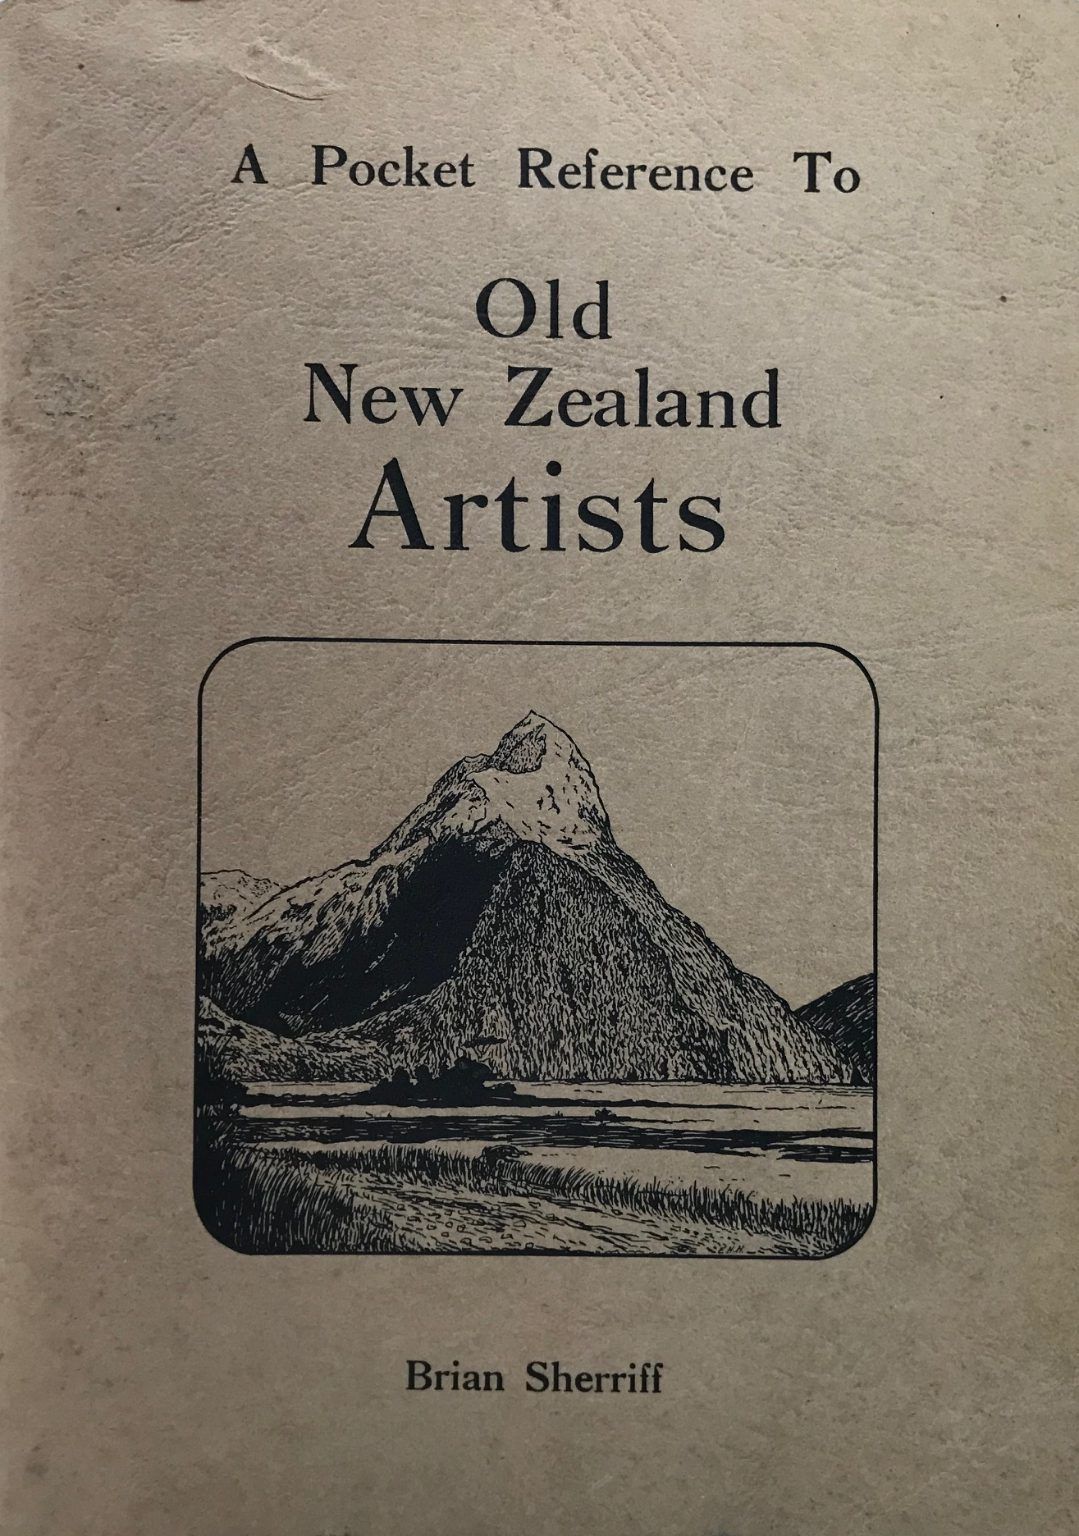 A POCKET REFERENCE TO OLD NEW ZEALAND ARTISTS